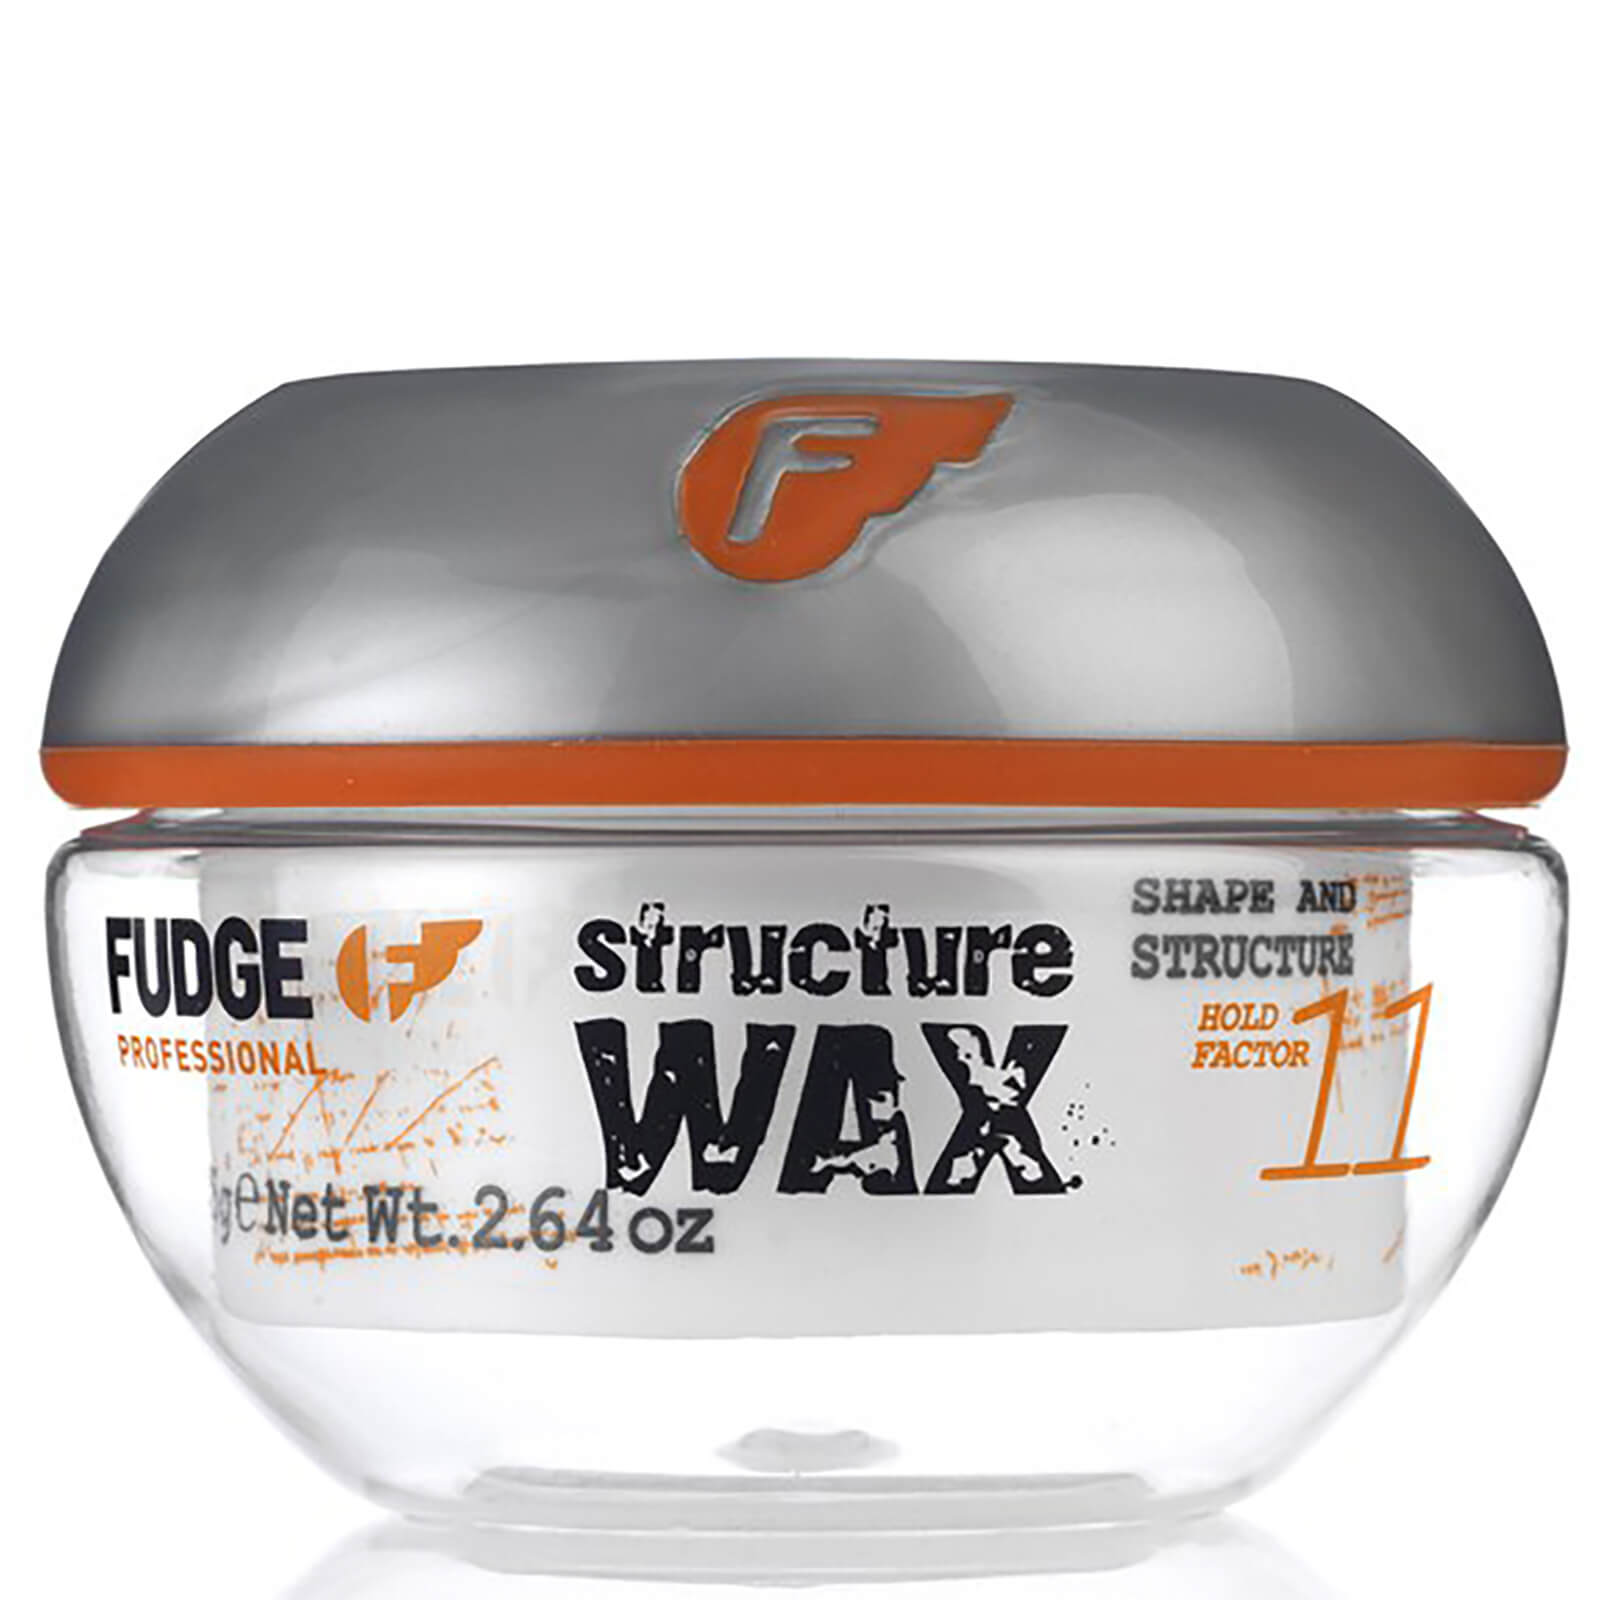 Fudge Structure Wax Shape and Structure (75 g)